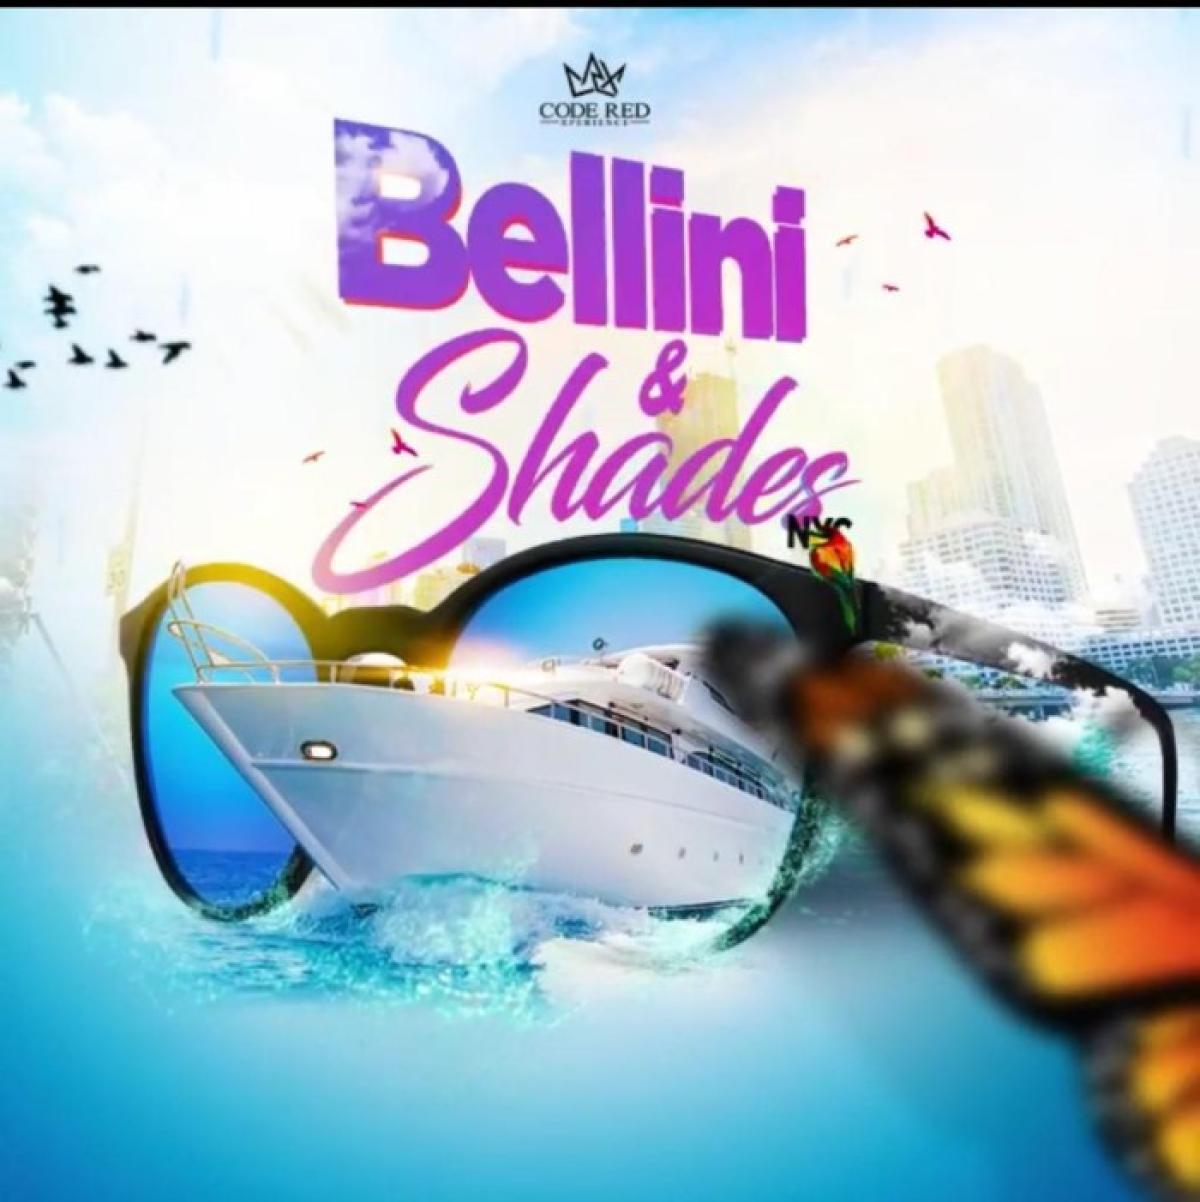  Bellini & Shades  flyer or graphic.